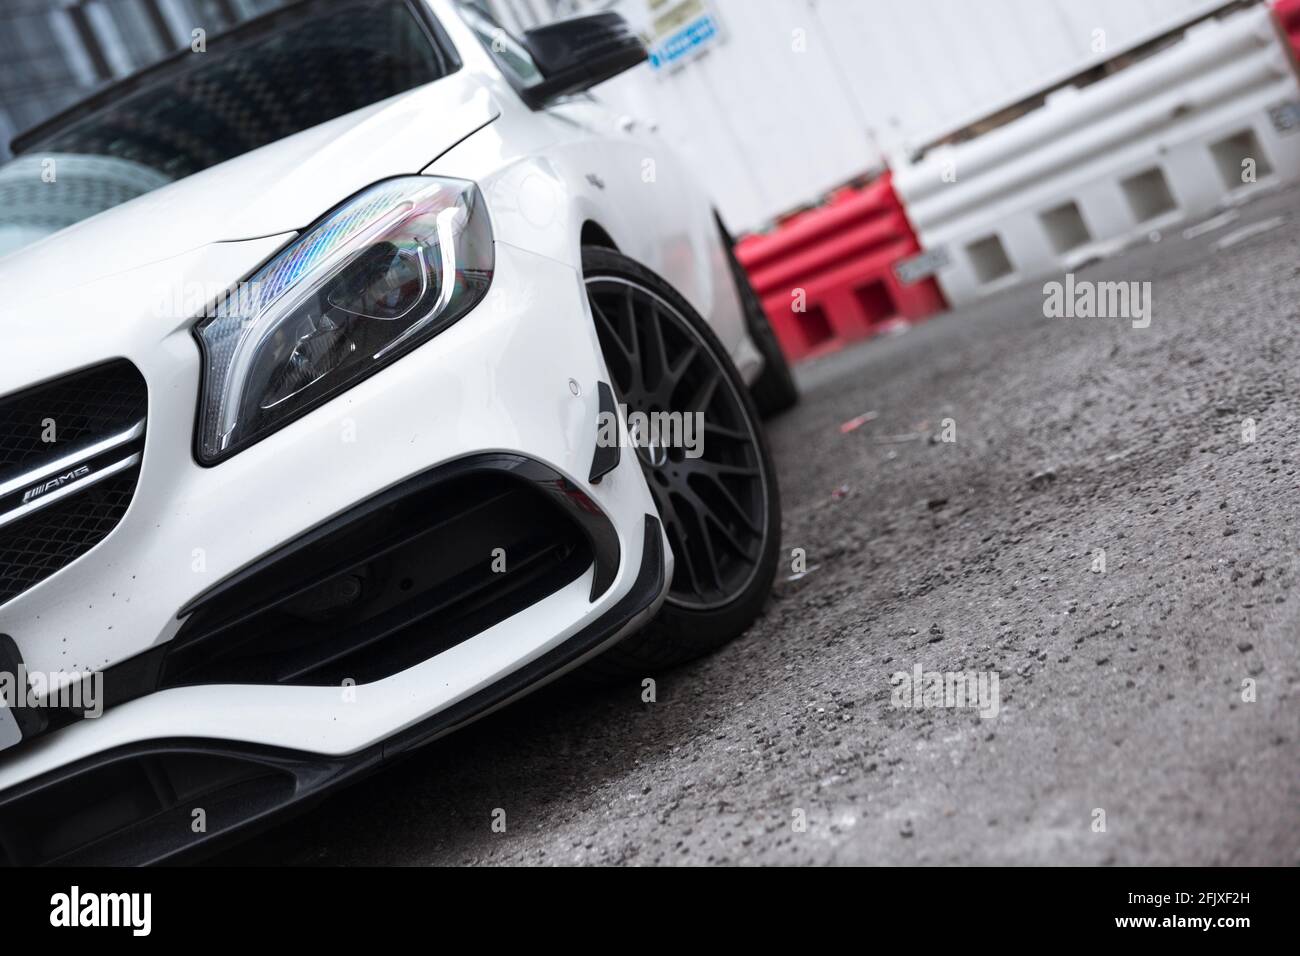 The Front LED Headlight With AMG Branding On A Cirrus White 2017 Mercedes Benz A45 AMG W176 With Aero Pack And Gloss Black Alloy Wheels. Stock Photo